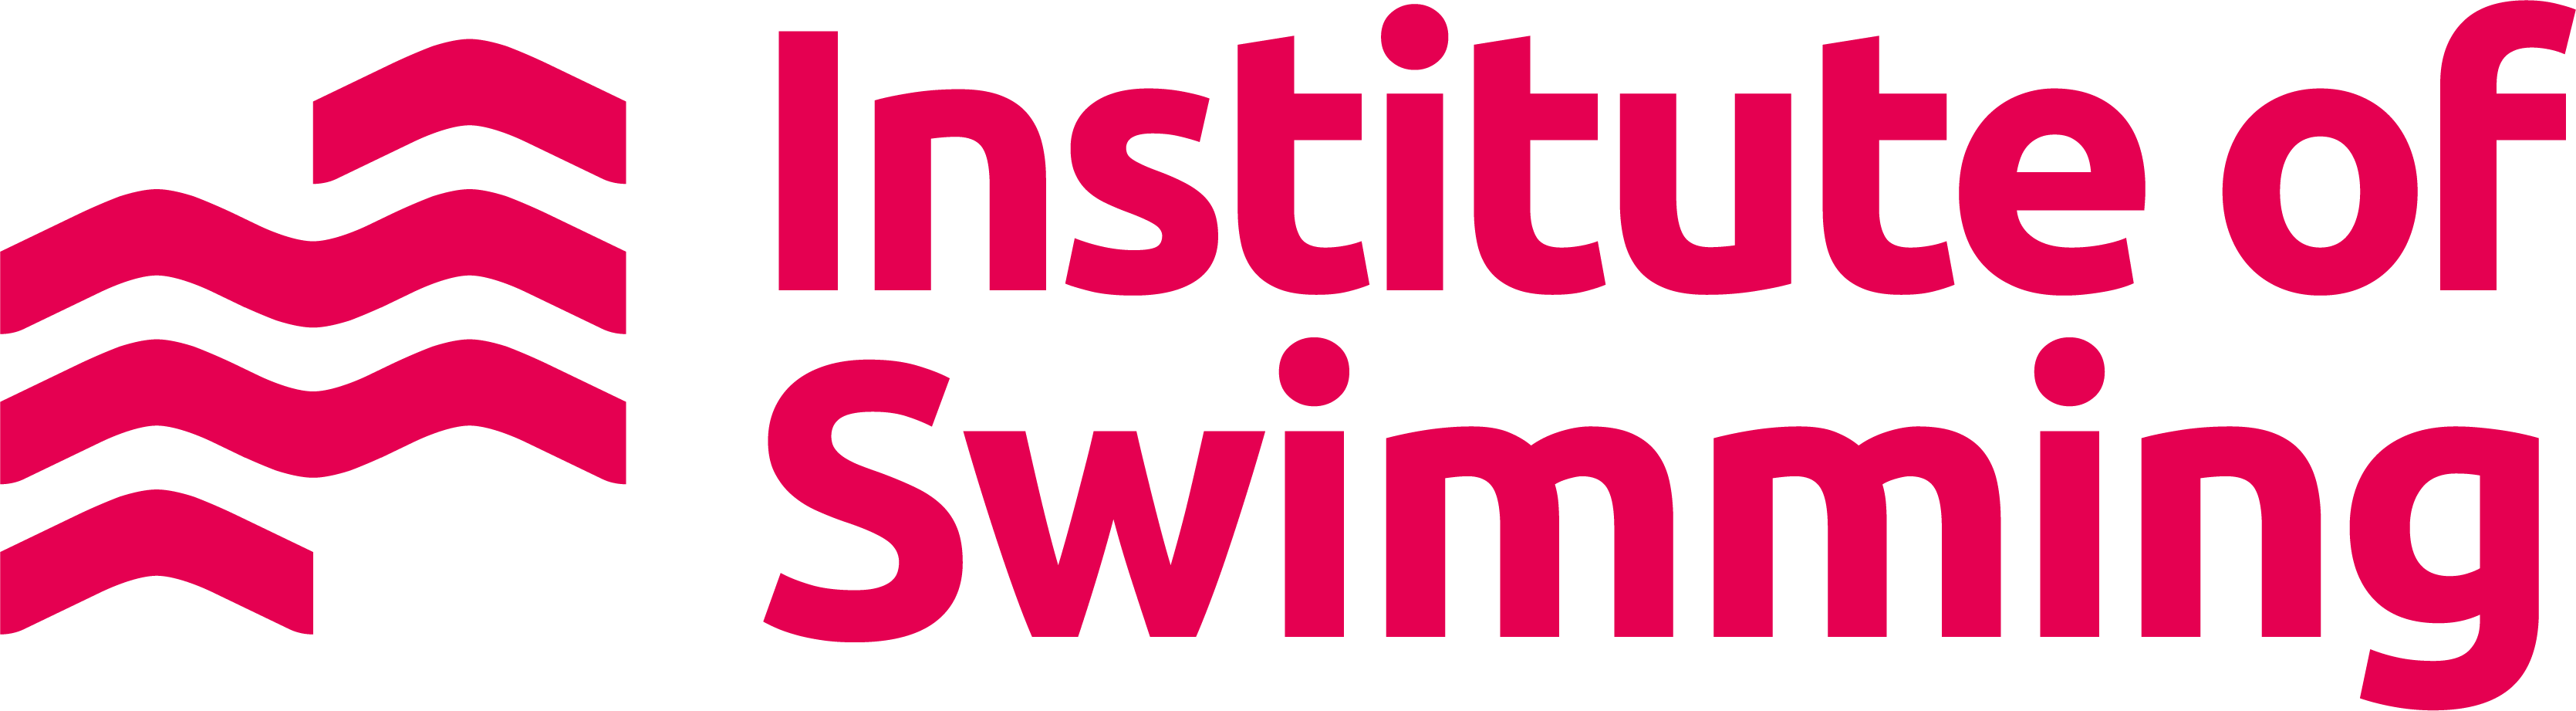 Season's Greetings from everyone at the Institute of Swimming!